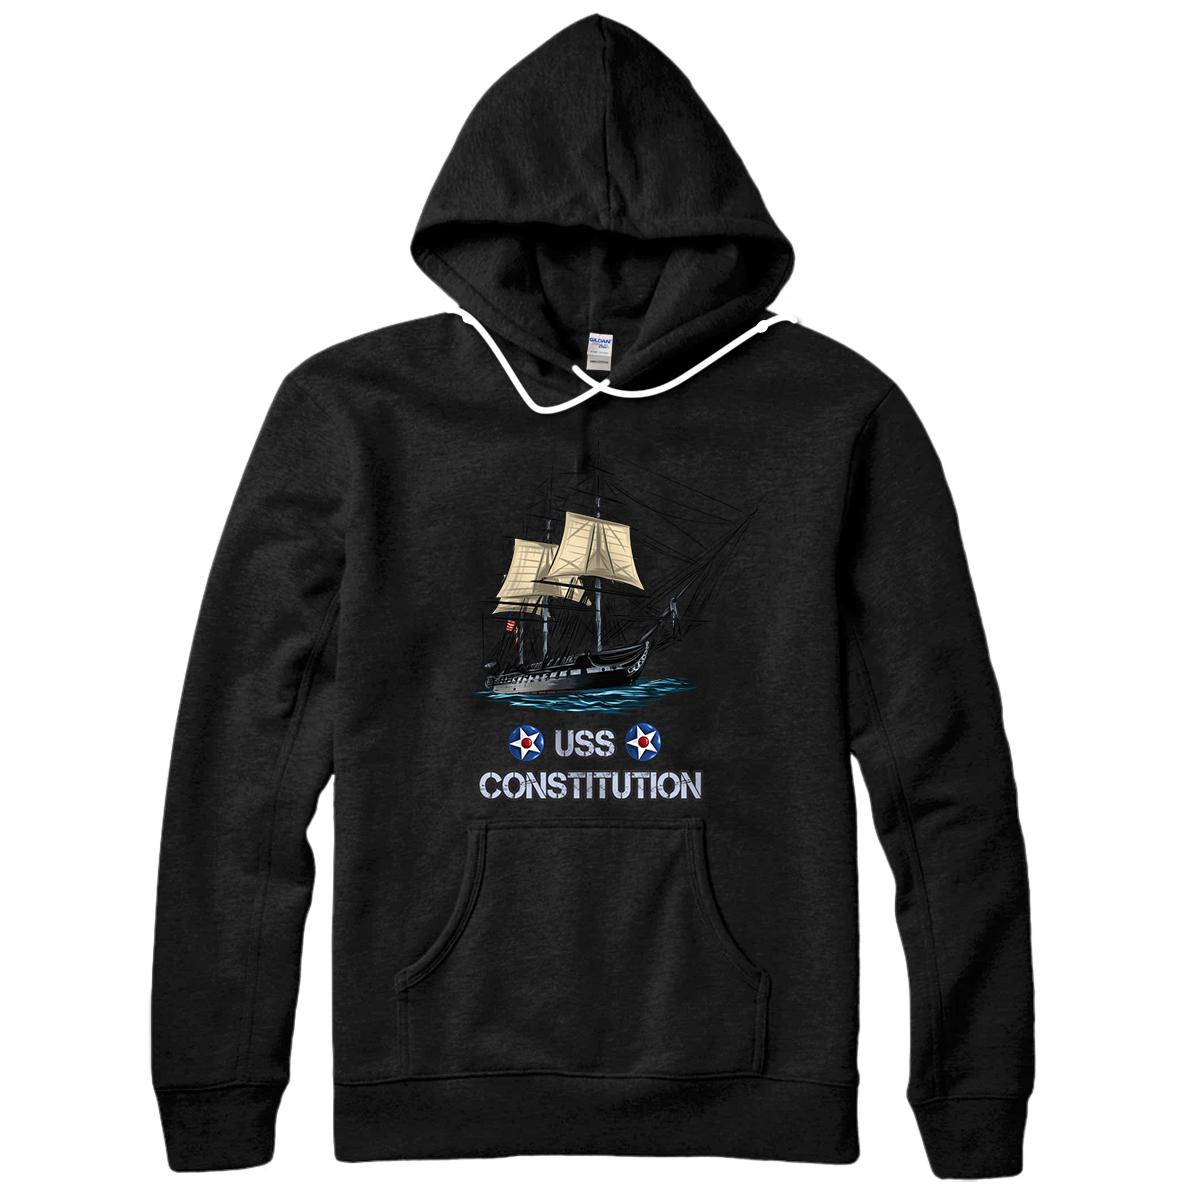 Personalized Vintage US Navy American Revolution USS Constitution gift Pullover Hoodie